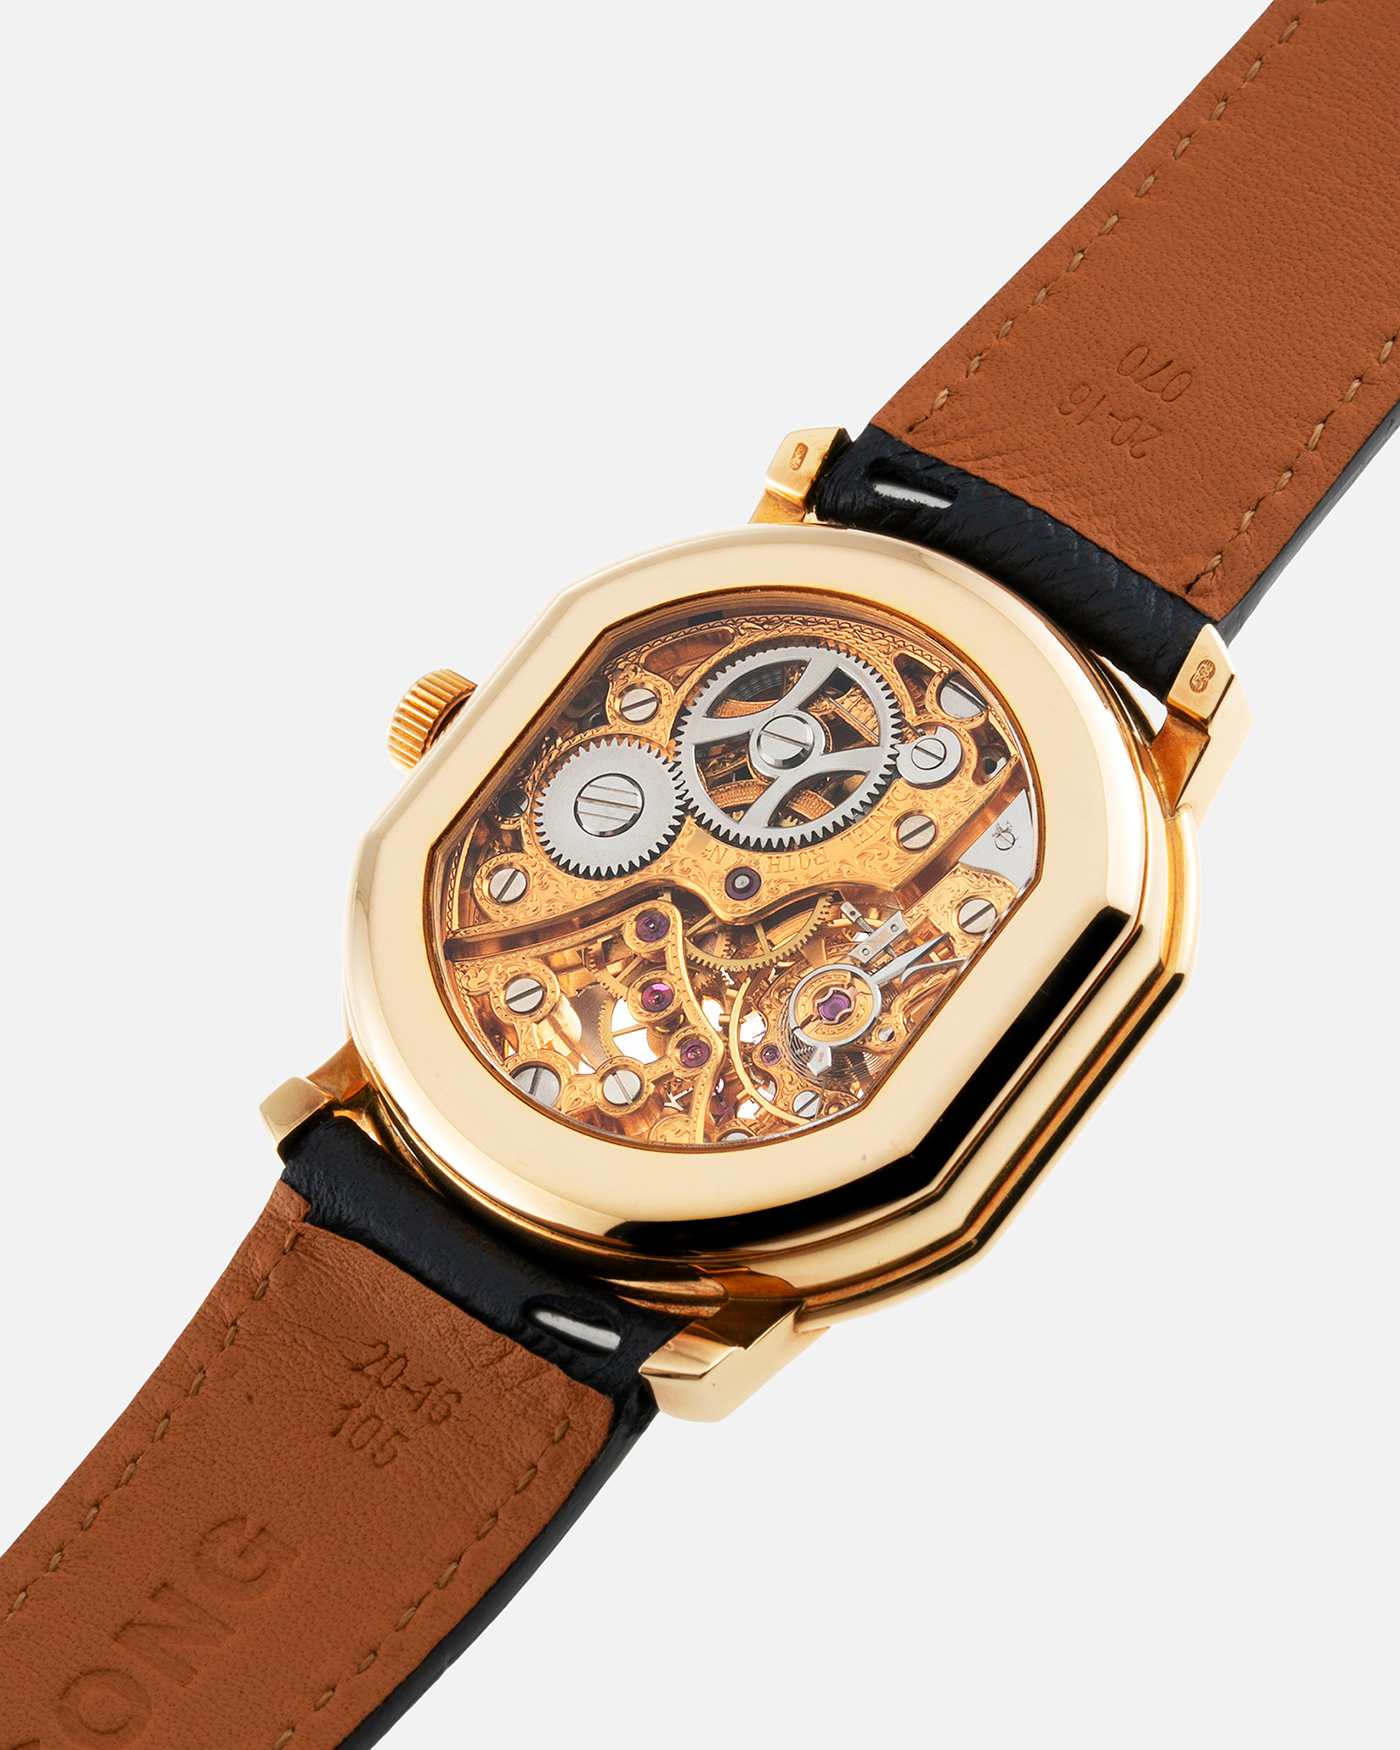 Brand: Daniel Roth Year: 1990’s Model: 2127 Skeleton Material: 18k Yellow Gold Movement: Lemania 27LN with Retrograde Function Case Diameter: 35mm X 38mm Strap: Molequin Navy Blue Textured Calf Strap and 18k Yellow Gold Daniel Roth Tang Buckle